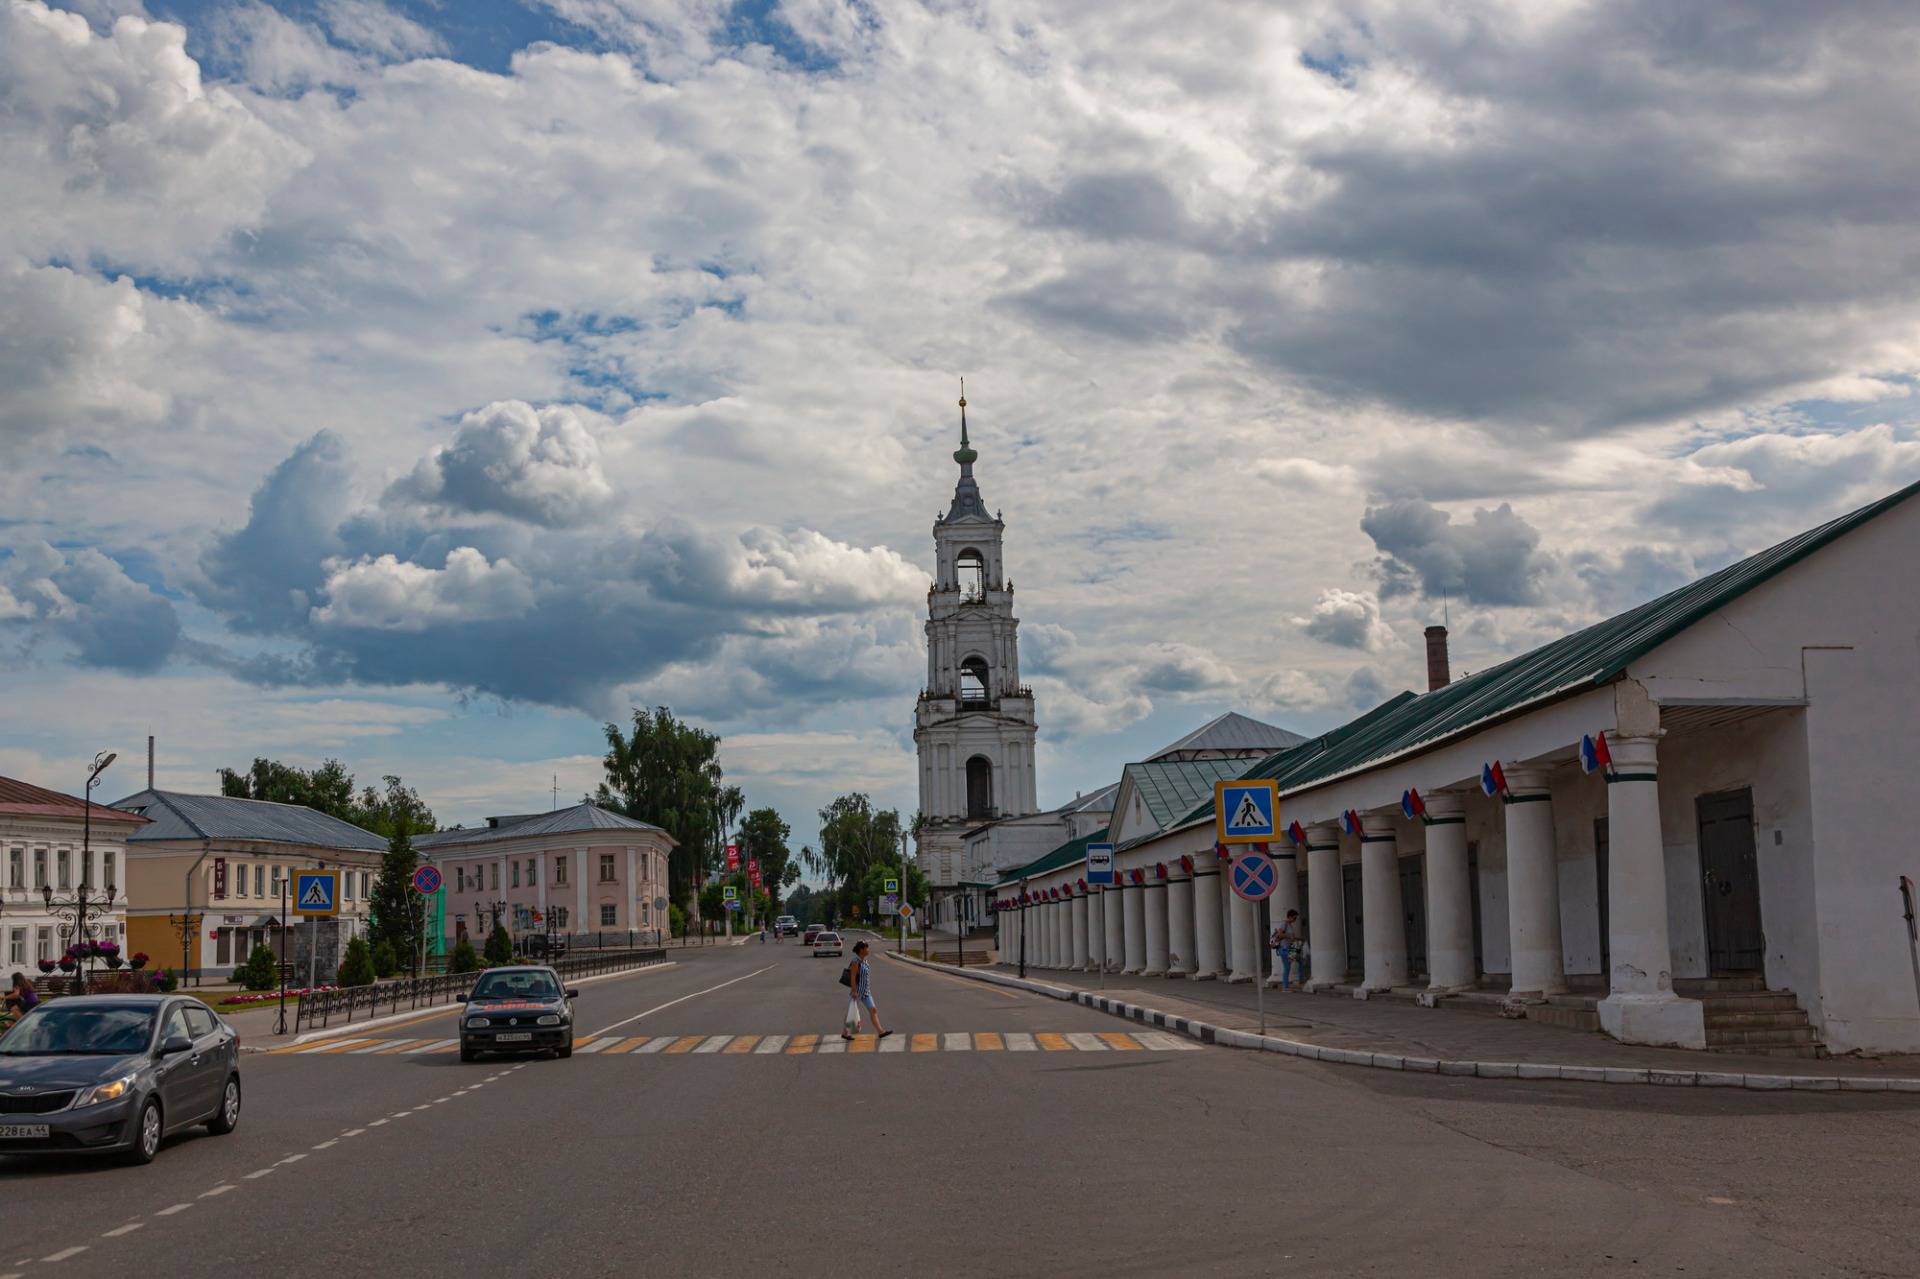 Where to go on a summer day from Kostroma for an hour or two